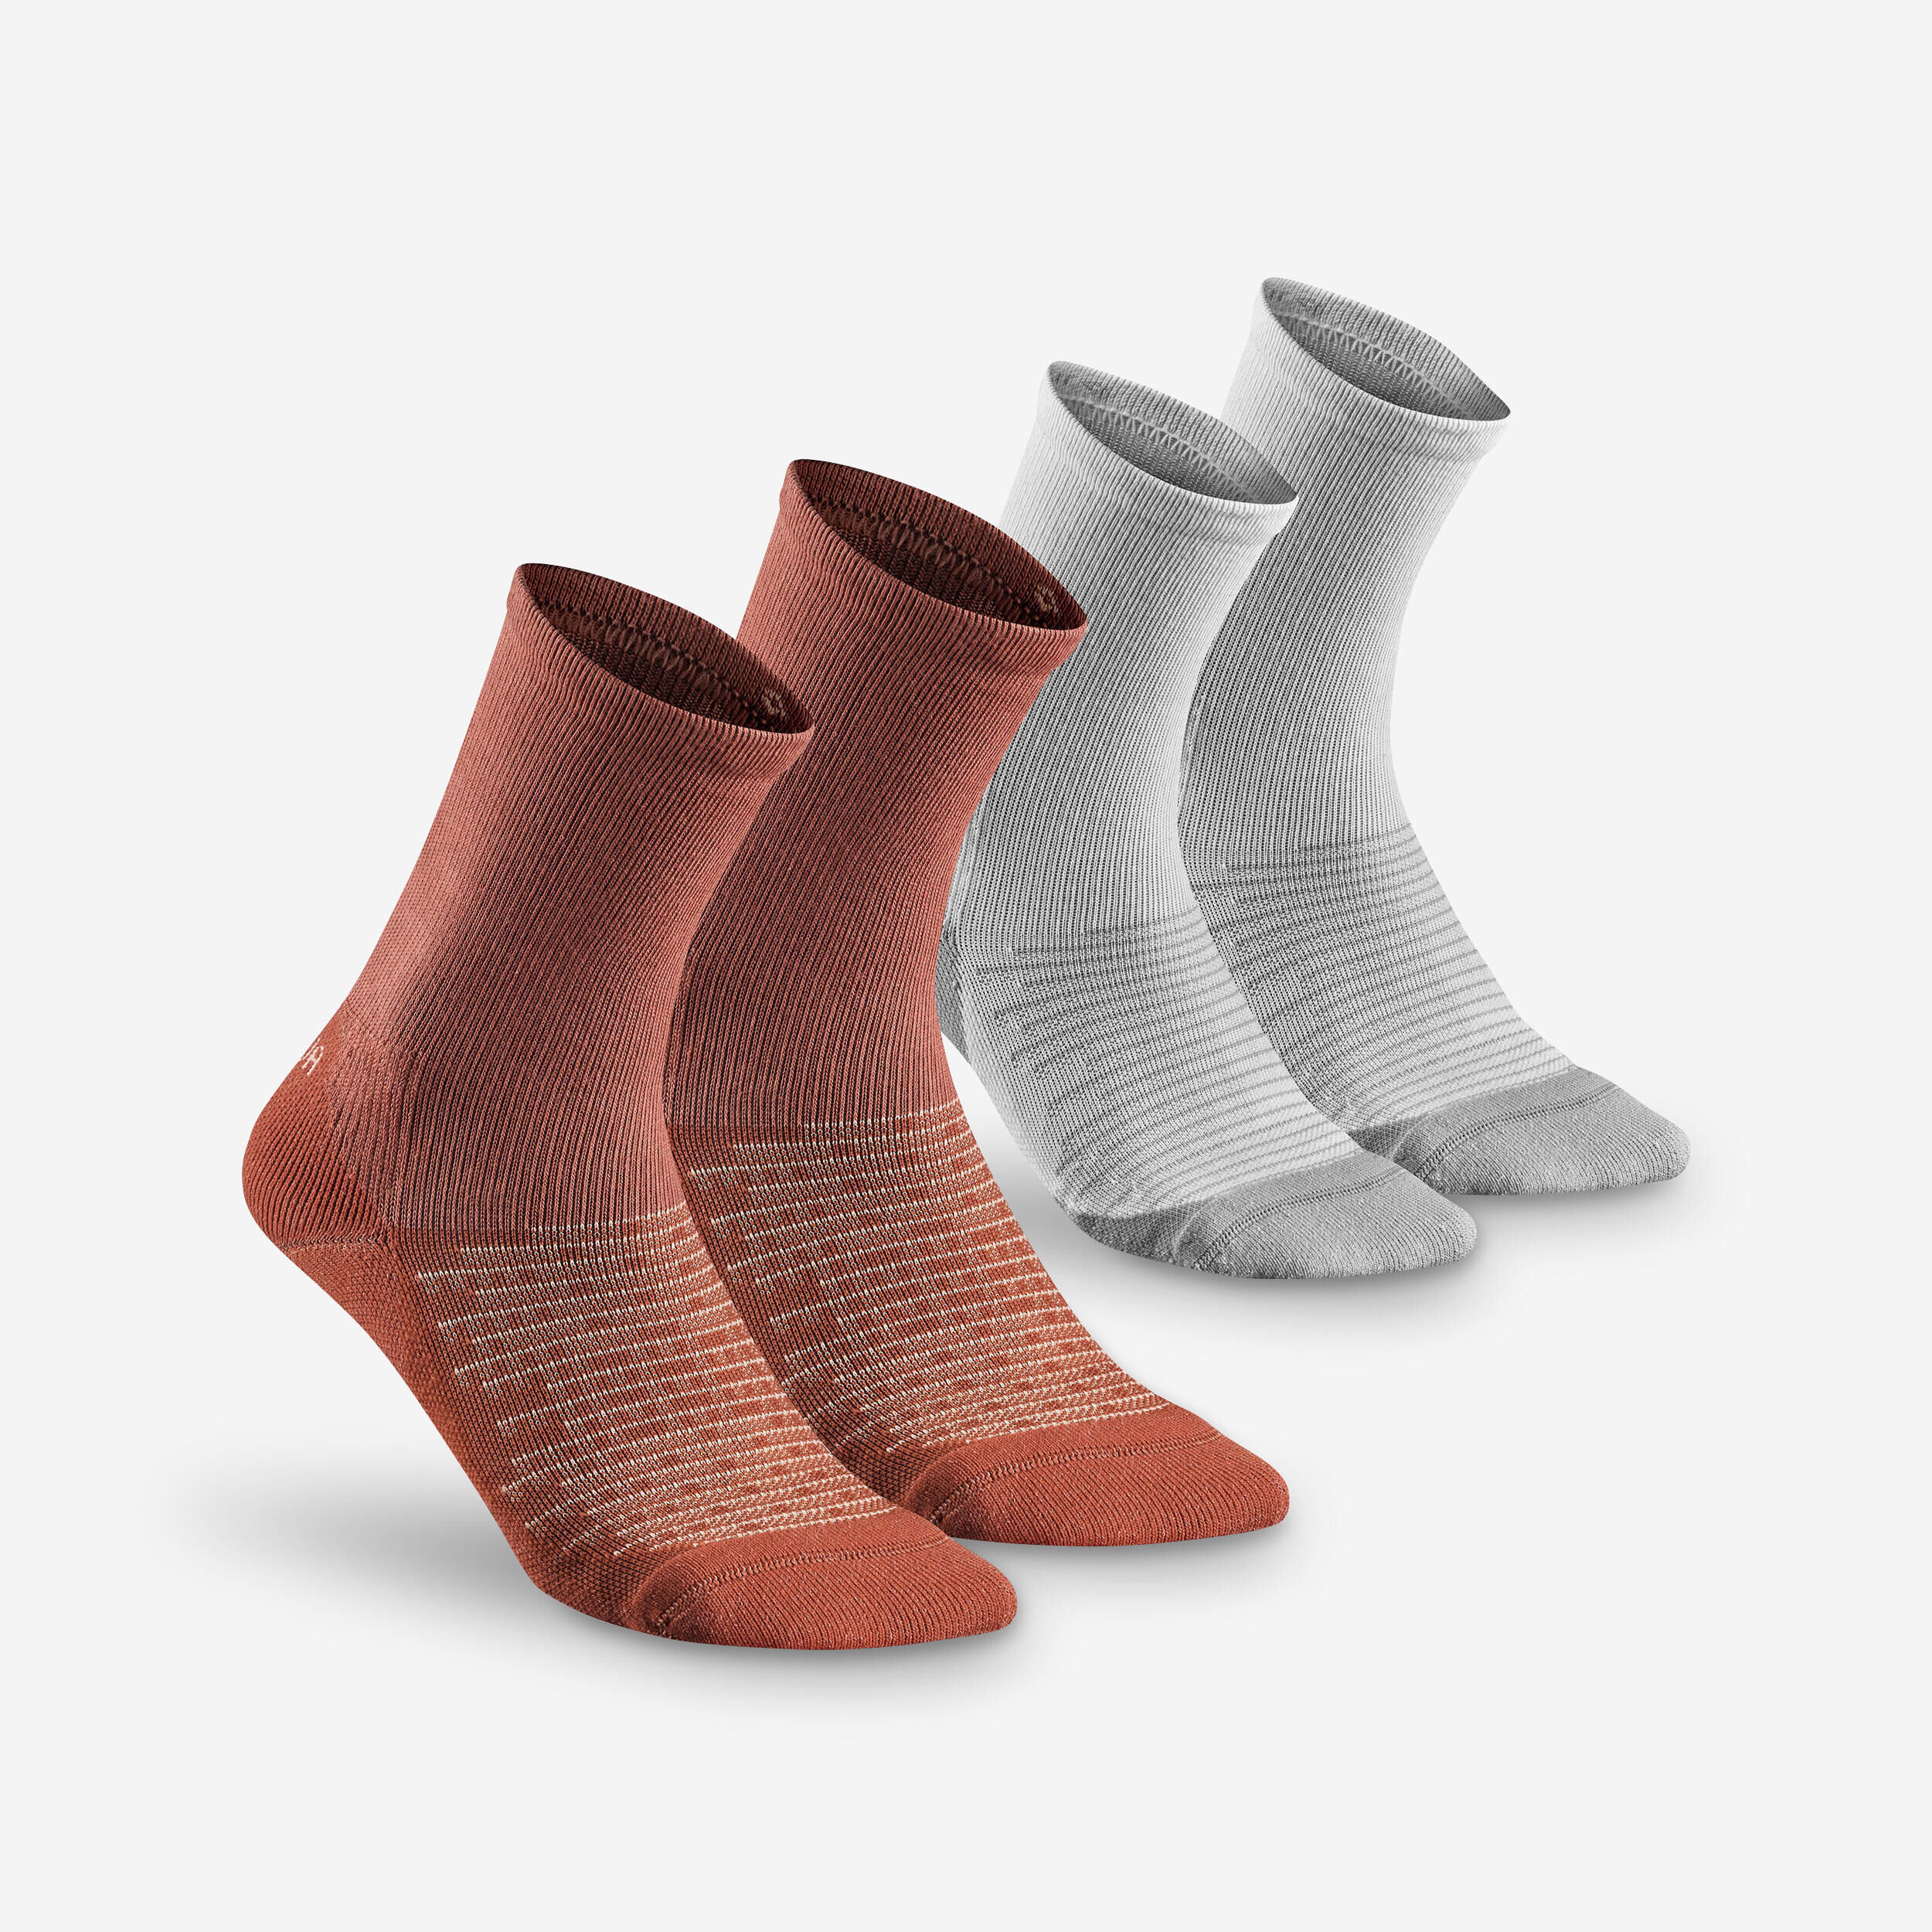 QUECHUA Sock Hike 100 High  - Pack of 2 Pairs - Linen and Terracotta